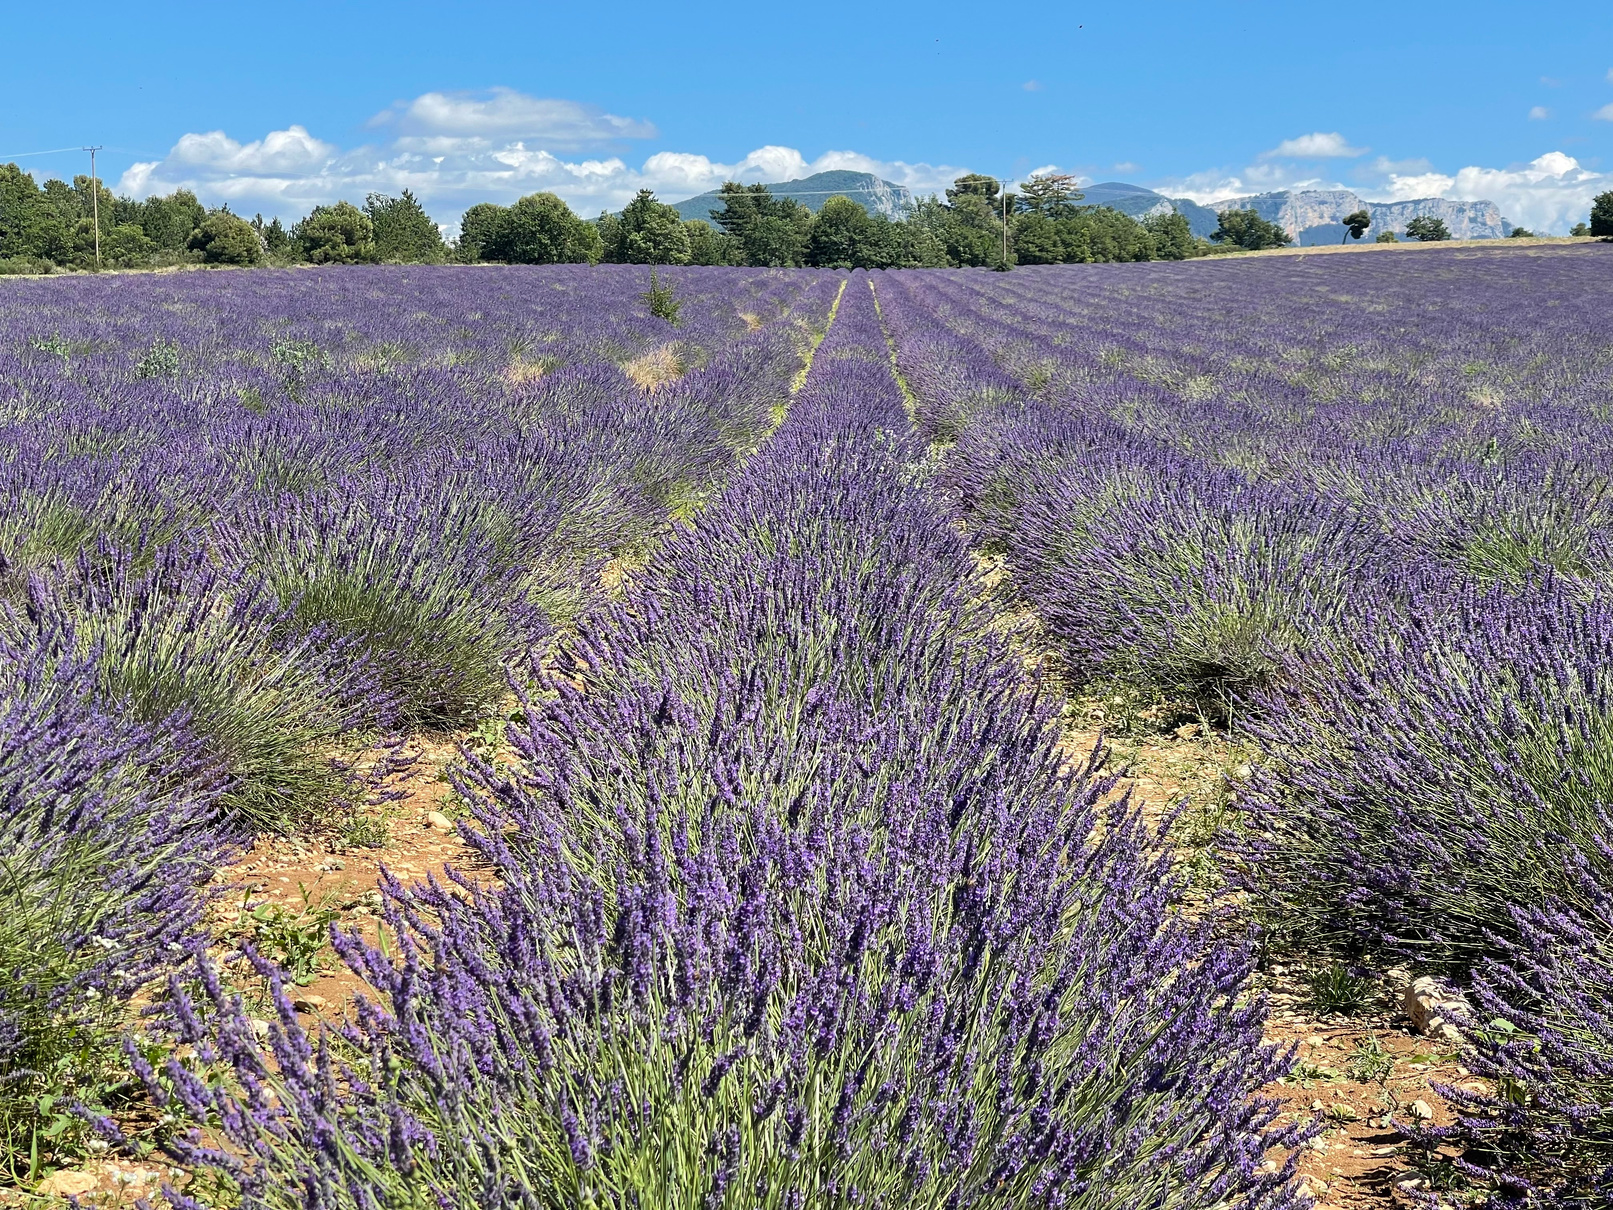 Photo of lavender fields in the south of France, taken by Khadijah in July 2023. Blue sky, low clouds, hills, trees, and rows of lavender.